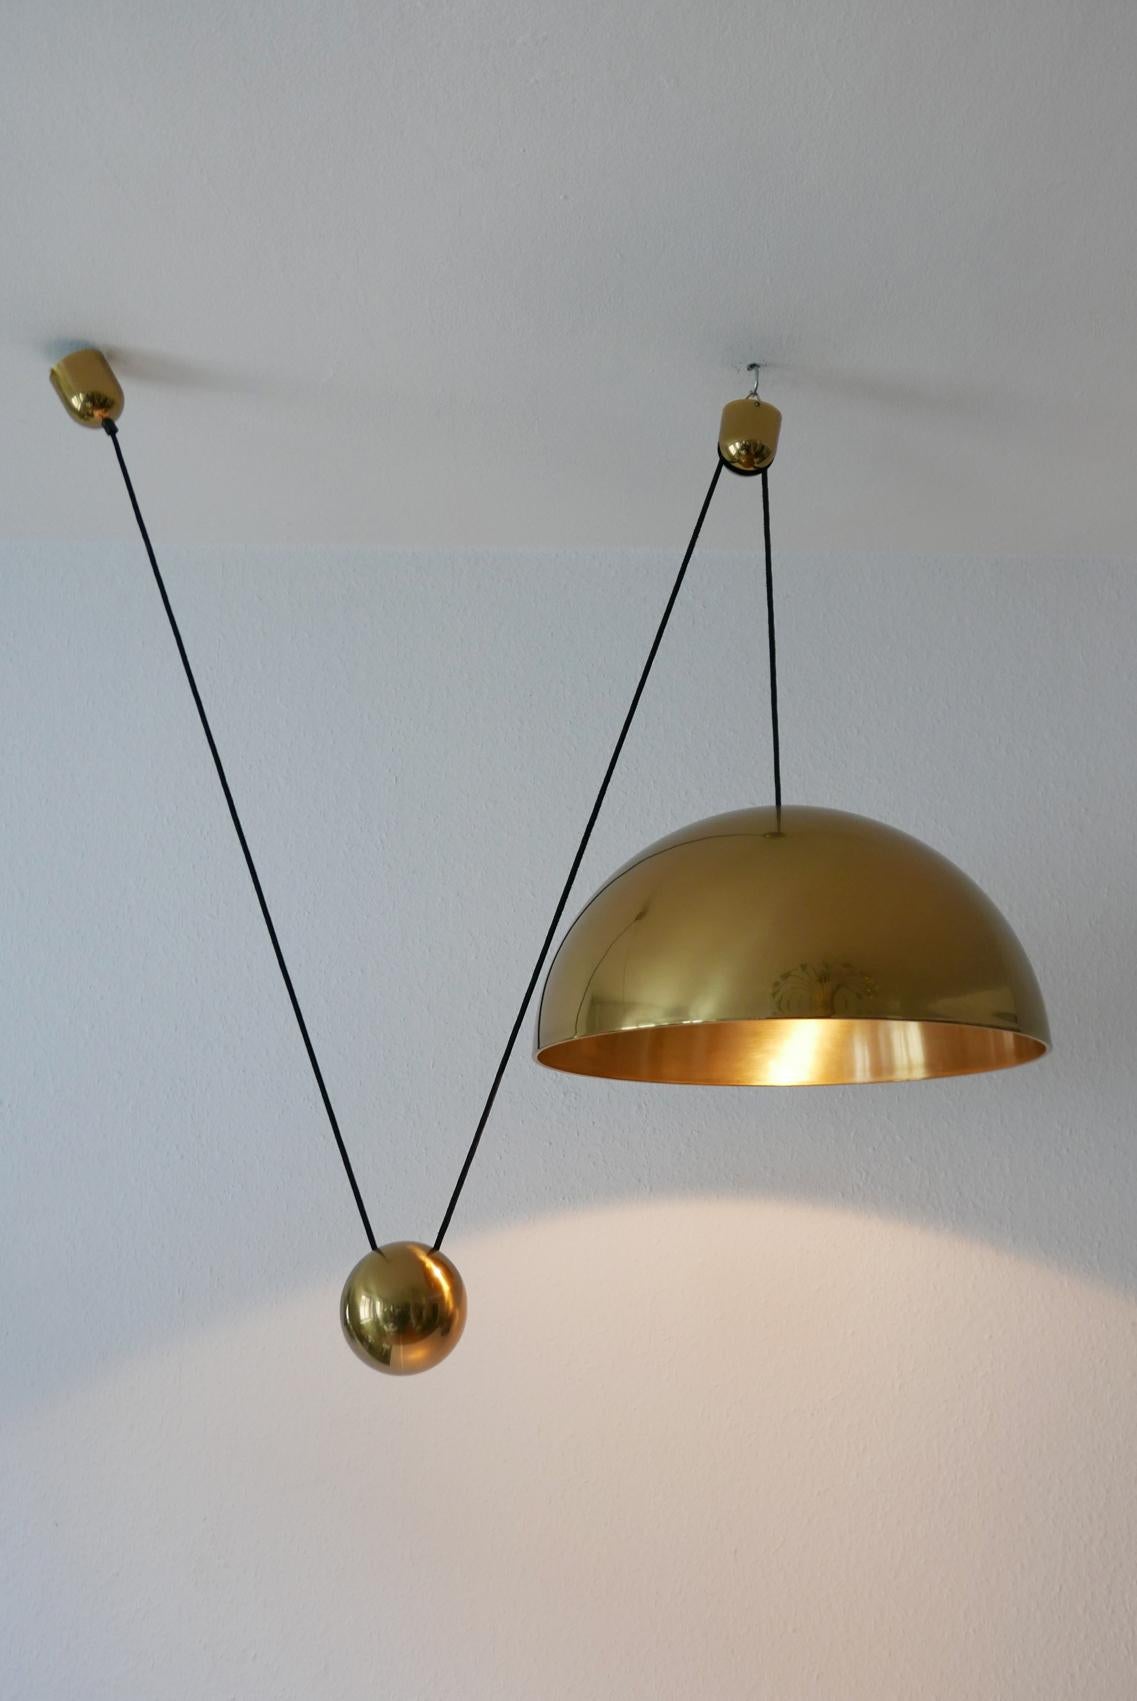 Elegant and extremely rare, large Mid-Century Modern counterweight pendant lamp Solan by Florian Schulz, Germany, 1980s.

Executed in solid polished brass. The lamp needs one E27 Edison screw fit bulb, is wired. It runs both on 110 / 230